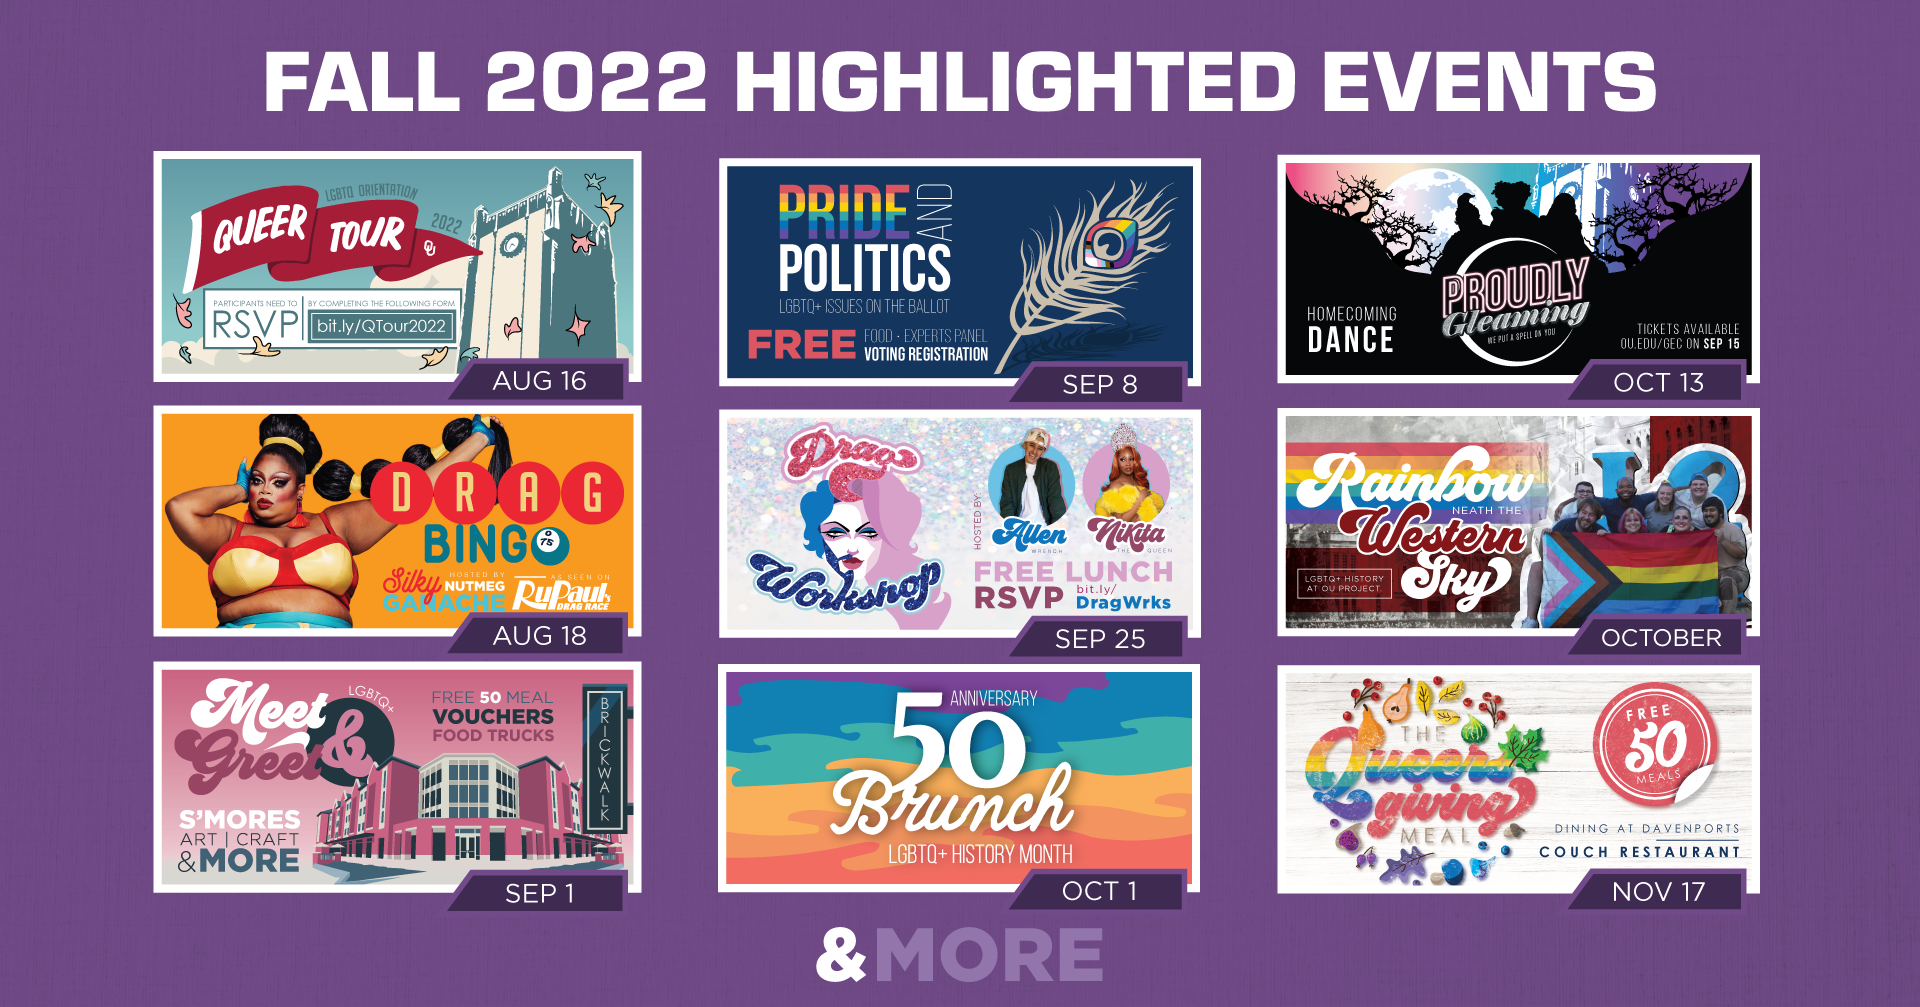 List of highlighted events hosted by LGBTQ+ Programs. Queer Tour on August 16. Drag Bingo on August 18. Meet & Greet on September 1. Pride & Politics: LGBTQ+ Issues on the Ballot on September 8. Drag Workshop on September 25. 50th Anniversary Brunch: LGBTQ+ History Month Event on October 1. Proudly Gleaming - Homecoming Dance on October 13. Rainbow Neath the Western Sky - LGBTQ+ History at OU Project throughout the month of October. Queers-giving meal on November 17.